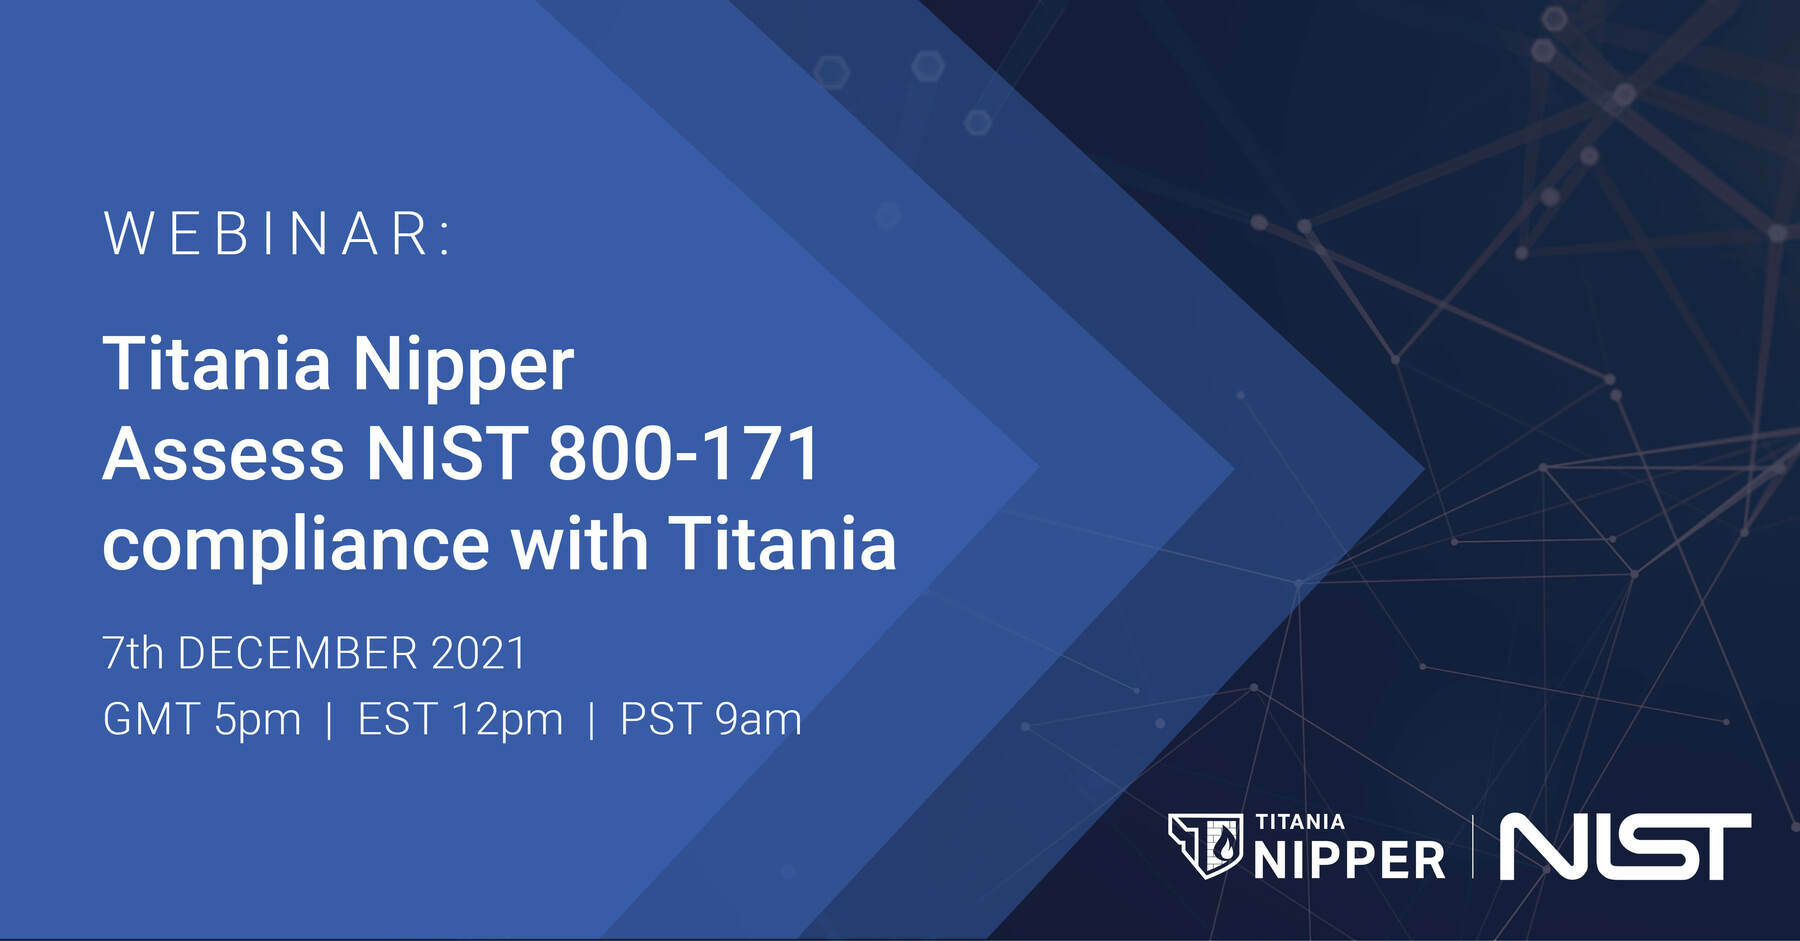 Assess NIST 800-171 Compliance with Titania Nipper